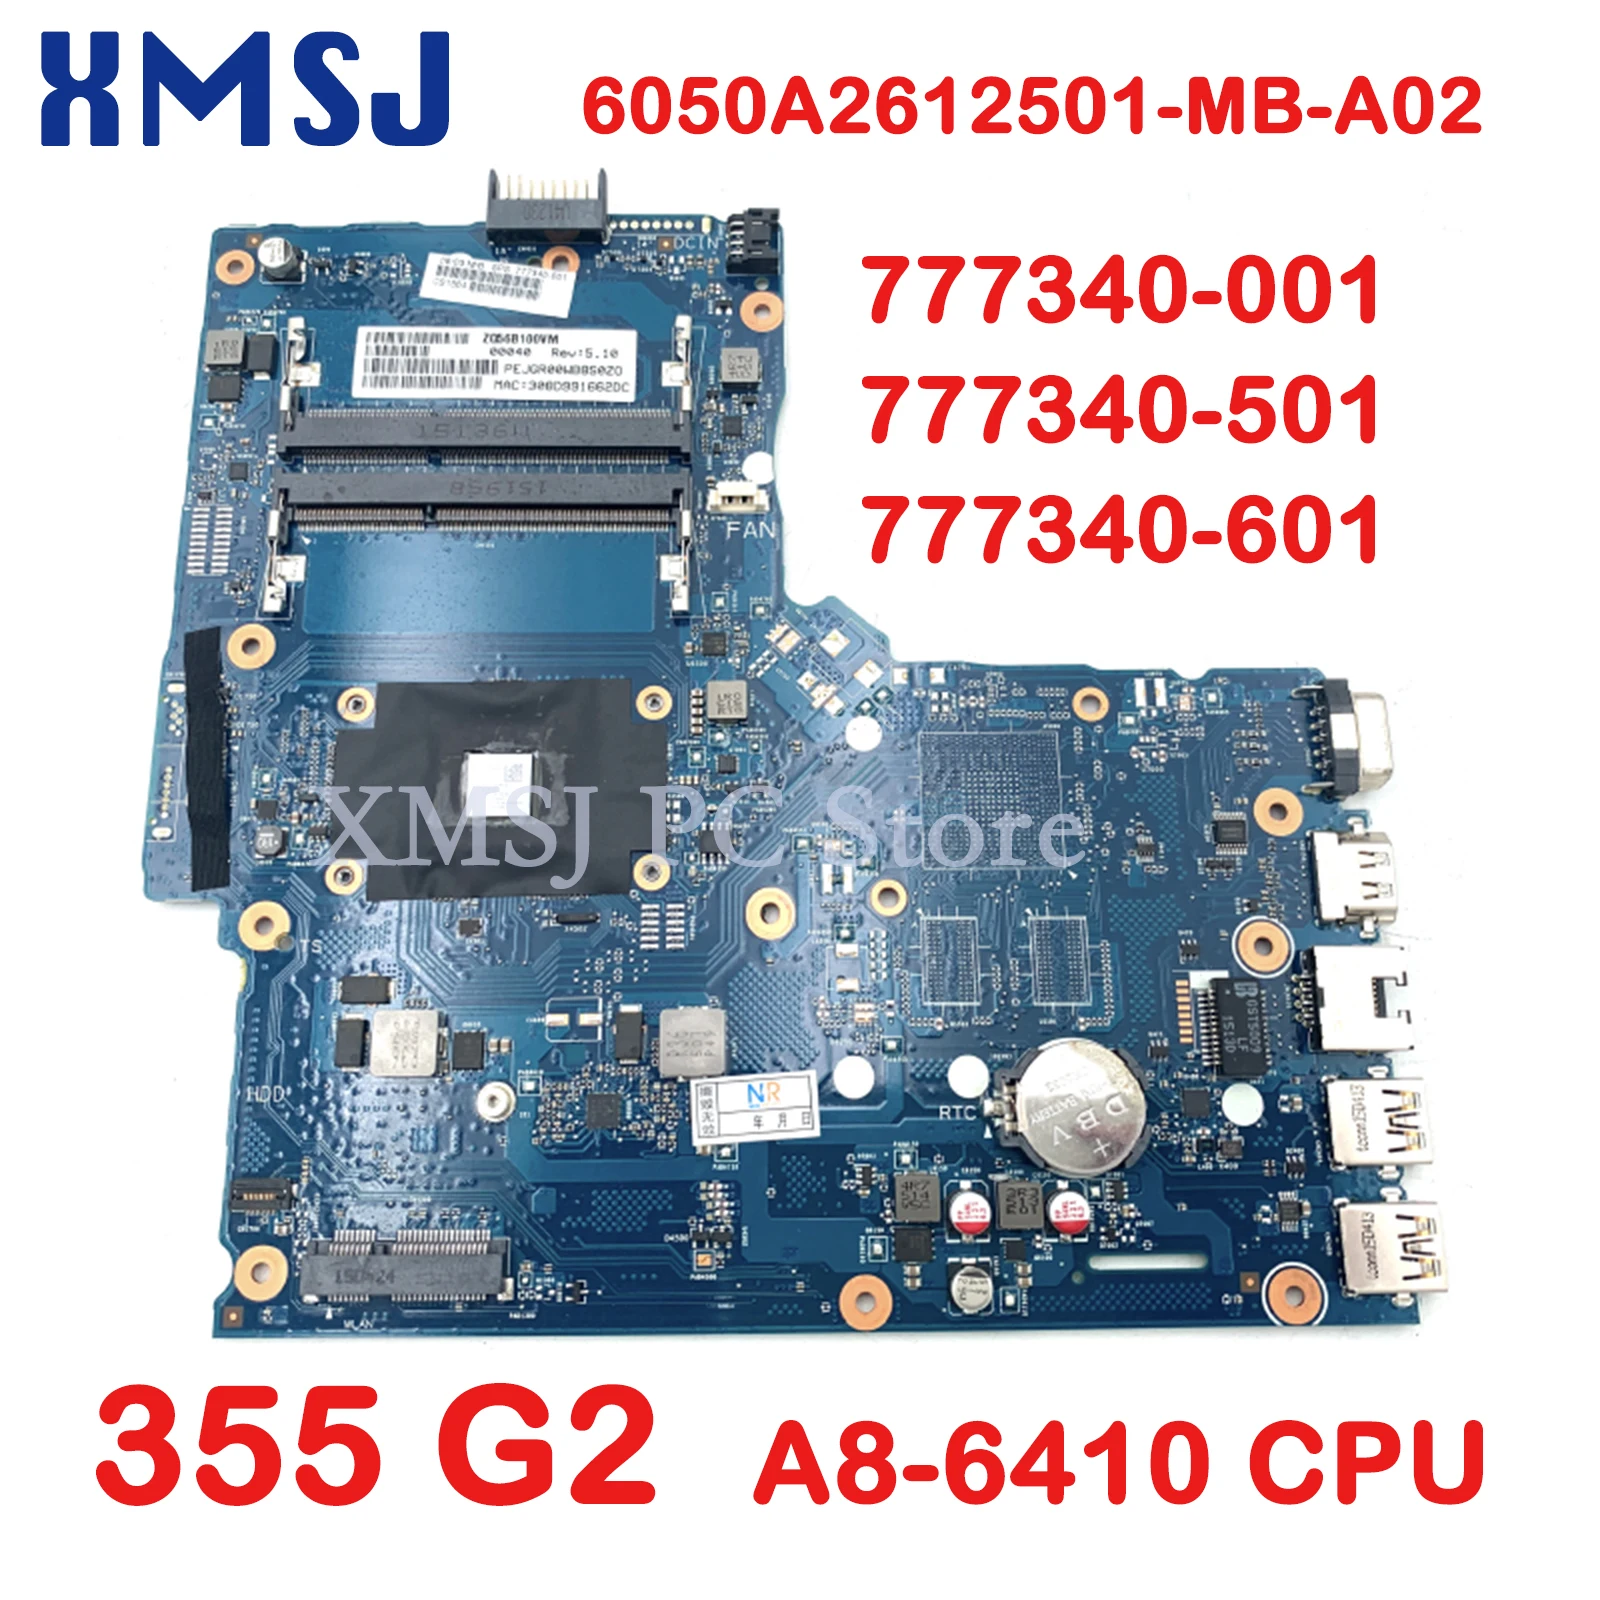 

XMSJ For 777340-001 777340-501 777340-601 6050A2612501-MB-A02 HP 355 G2 Laptop Motherboard A8-6410 CPU Main Board Fully Test